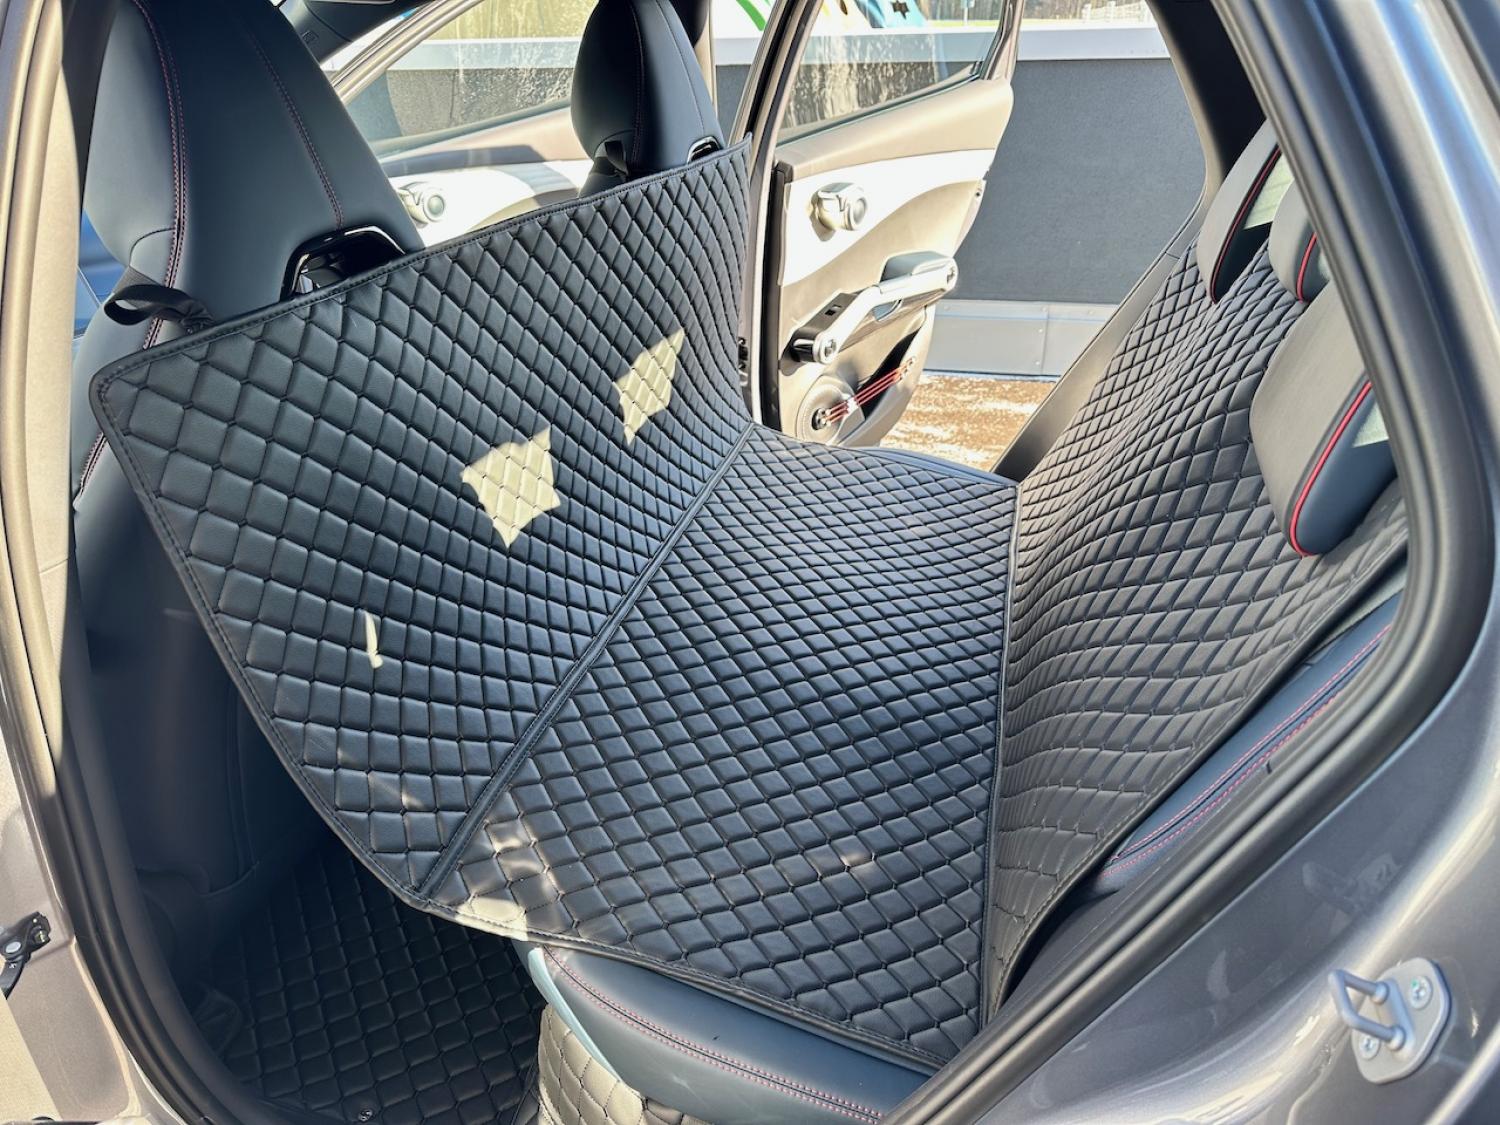 CARSTYLER® Back Seat Cover Geeignet Für Peugeot 3008